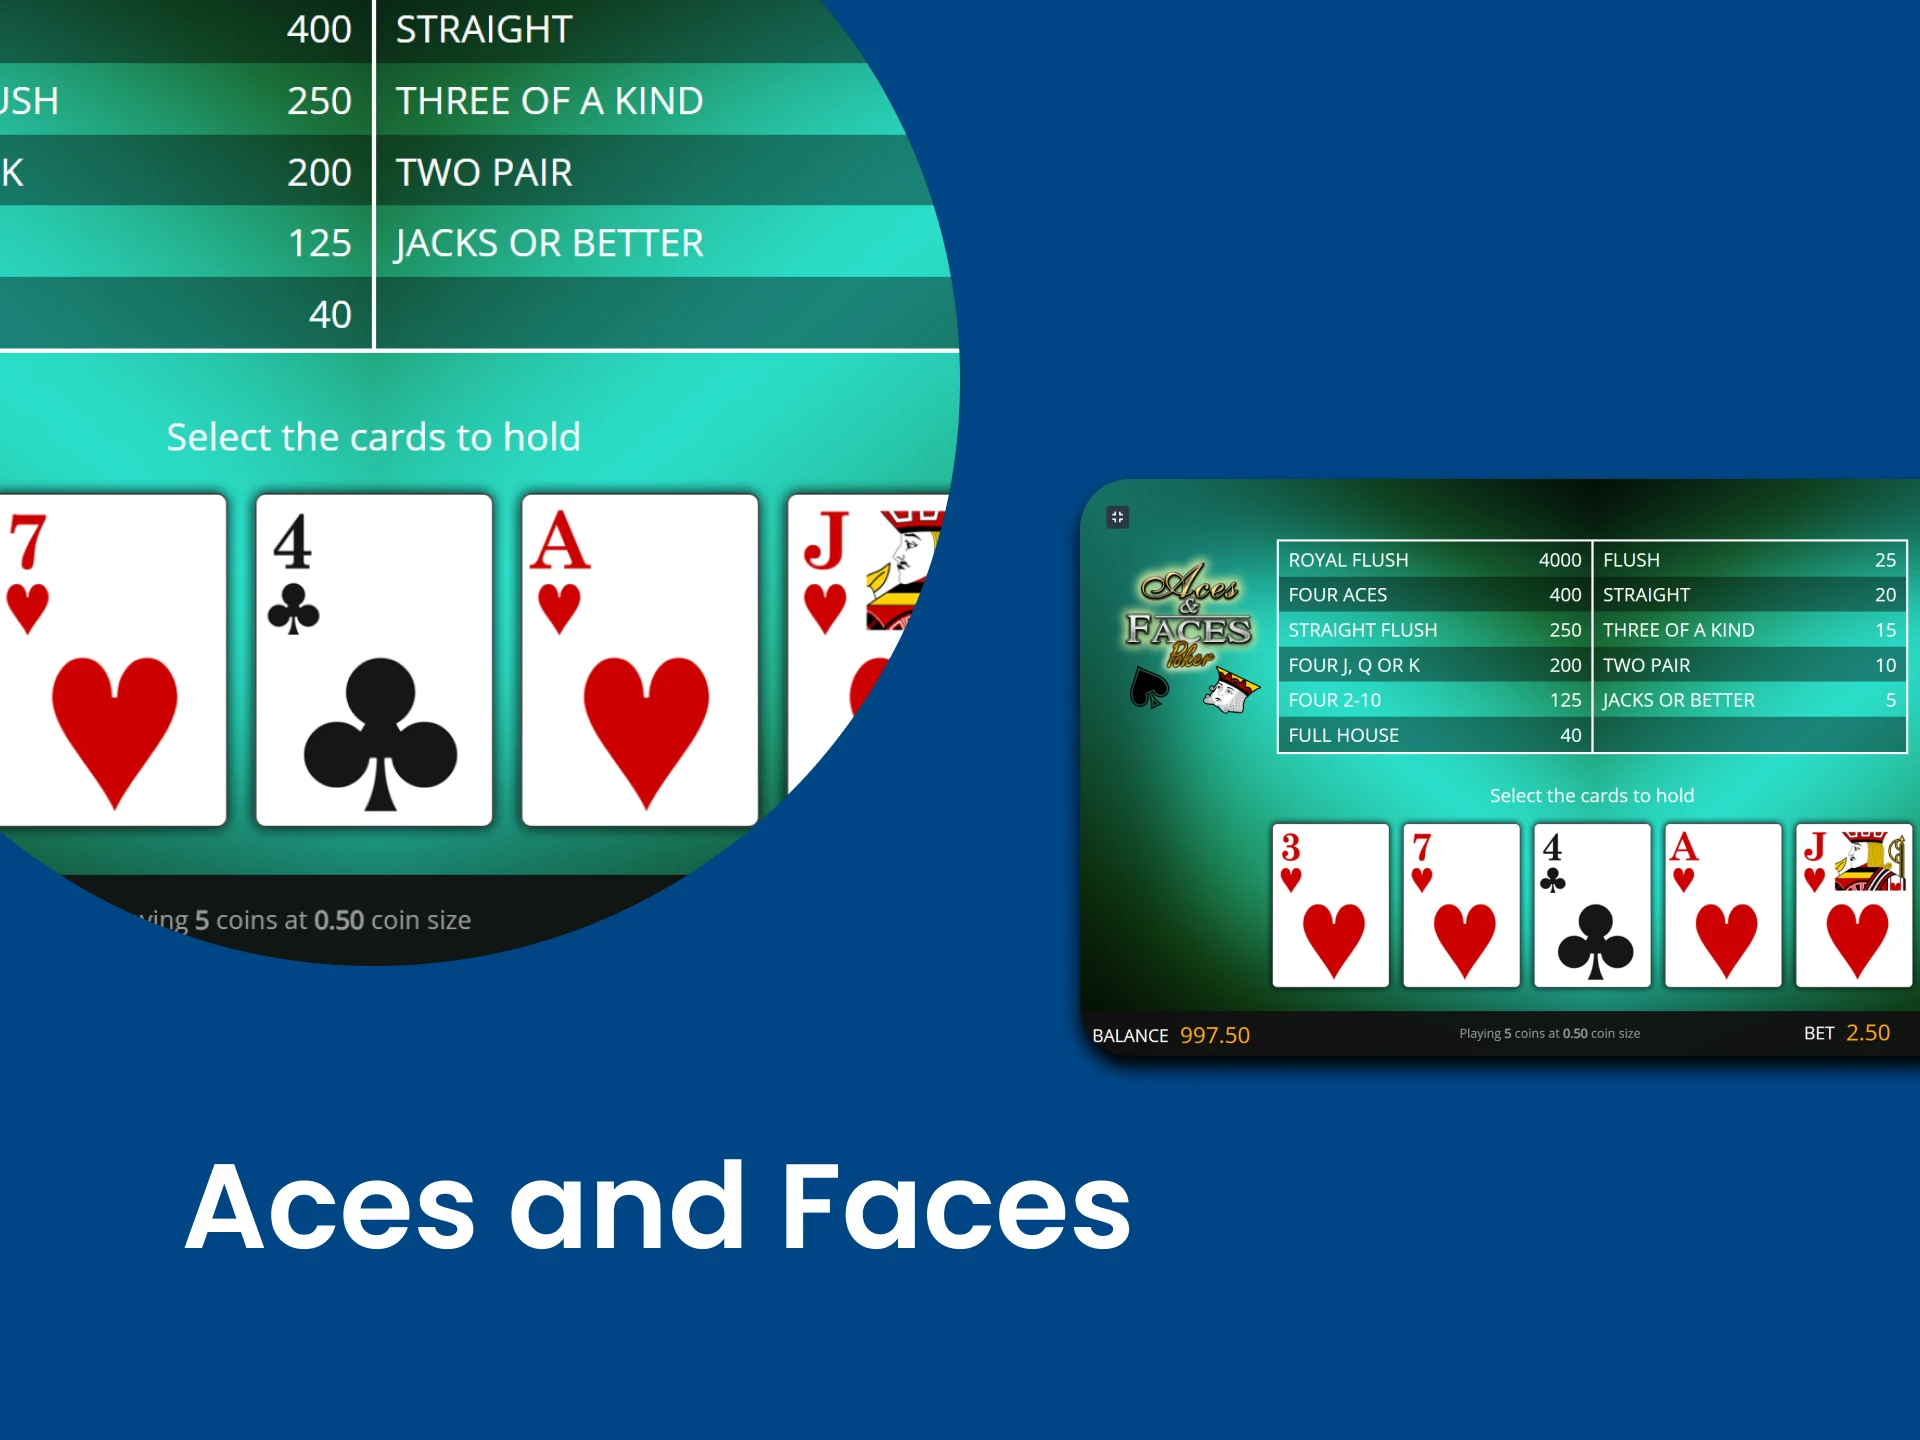 Select one of the Video Poker games Aces and Faces.